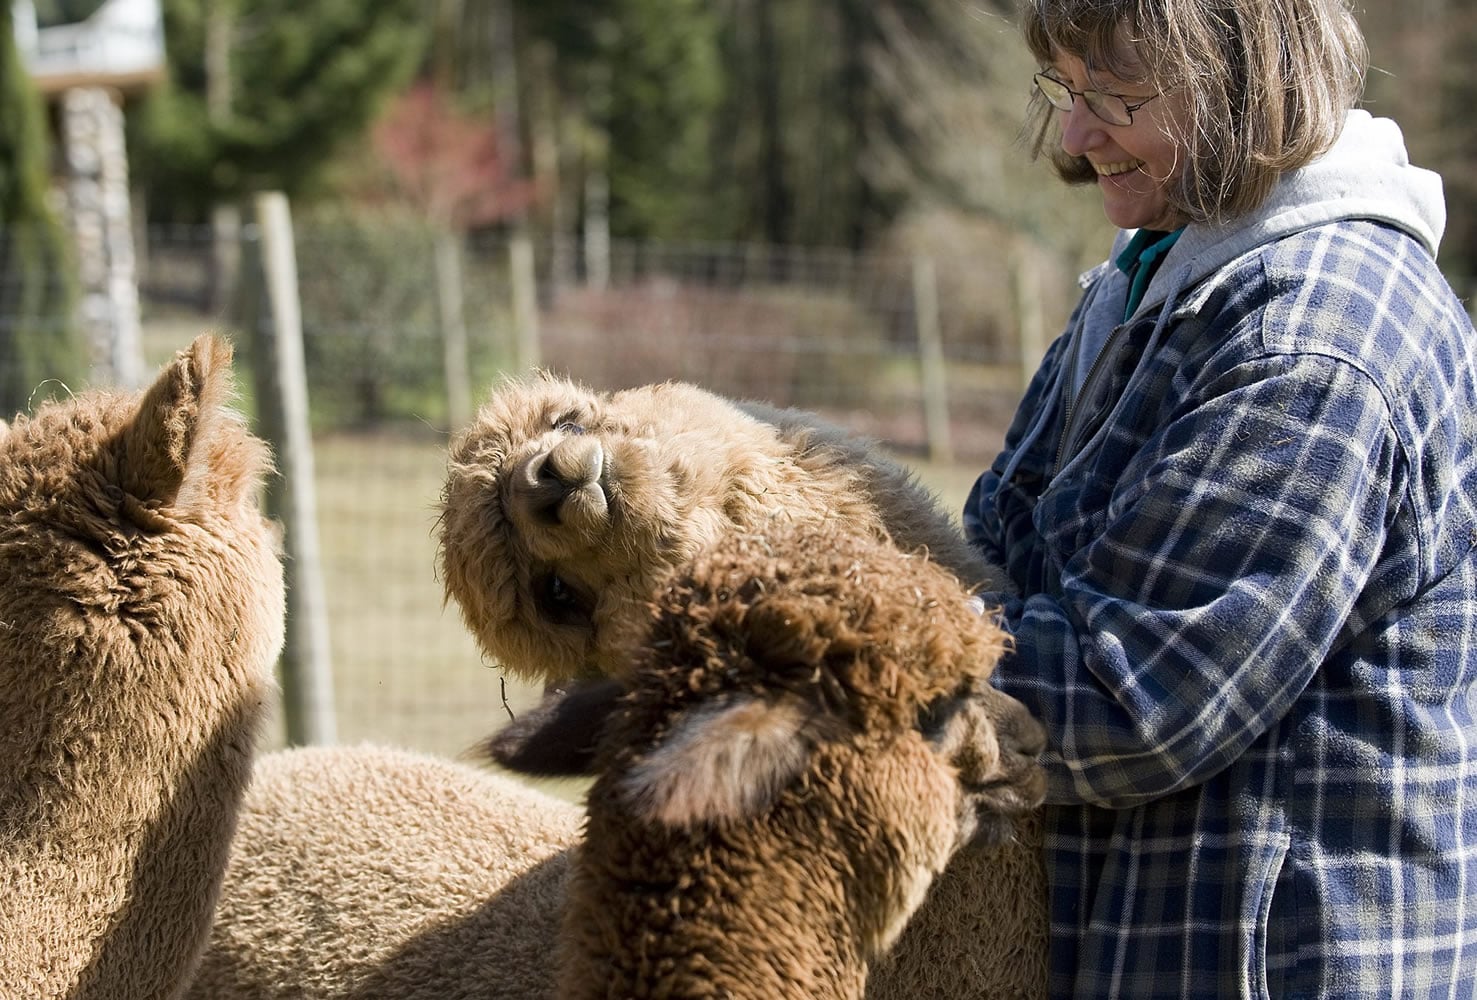 Photos by Steven Lane/The Columbian
Ruthie Gohl of Columbia Mist Alpacas in Woodland said each animal in her herd has a unique personality.